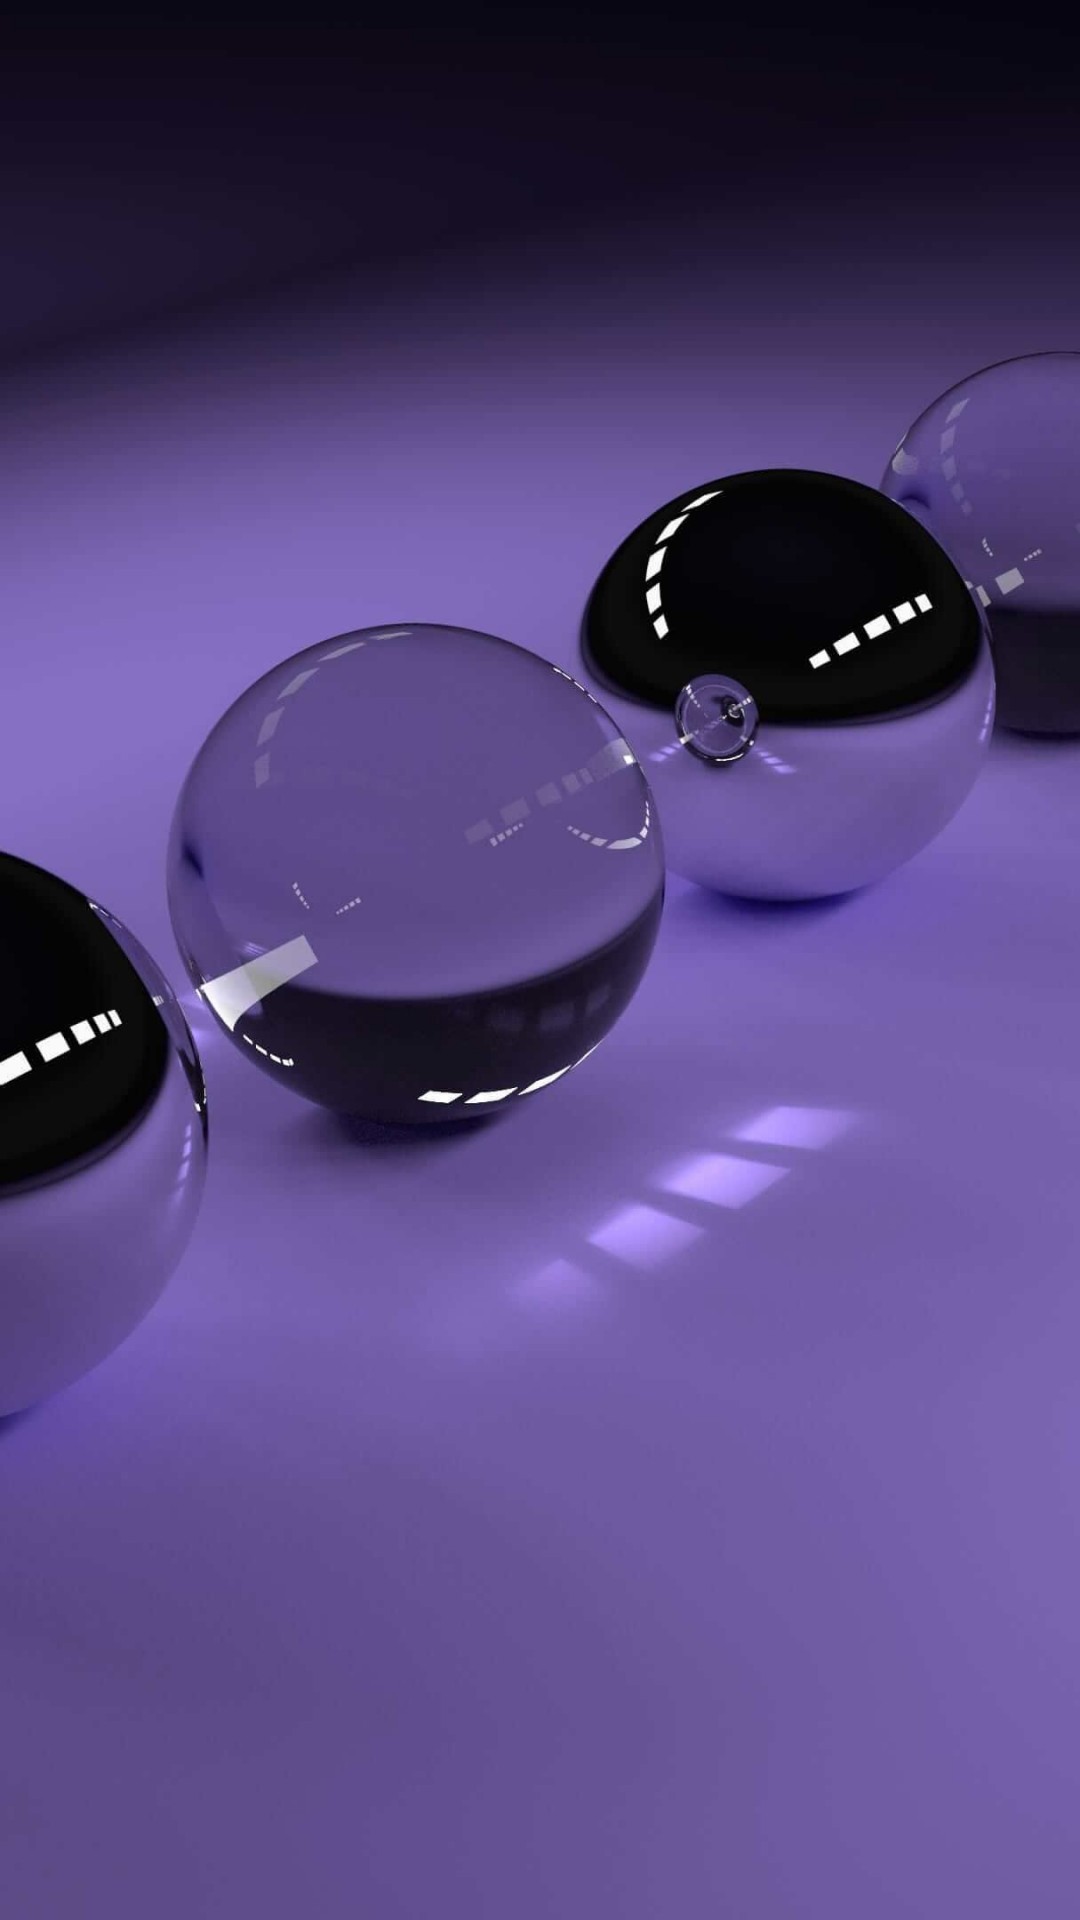 3D Glossy Spheres Wallpaper for SONY Xperia Z3